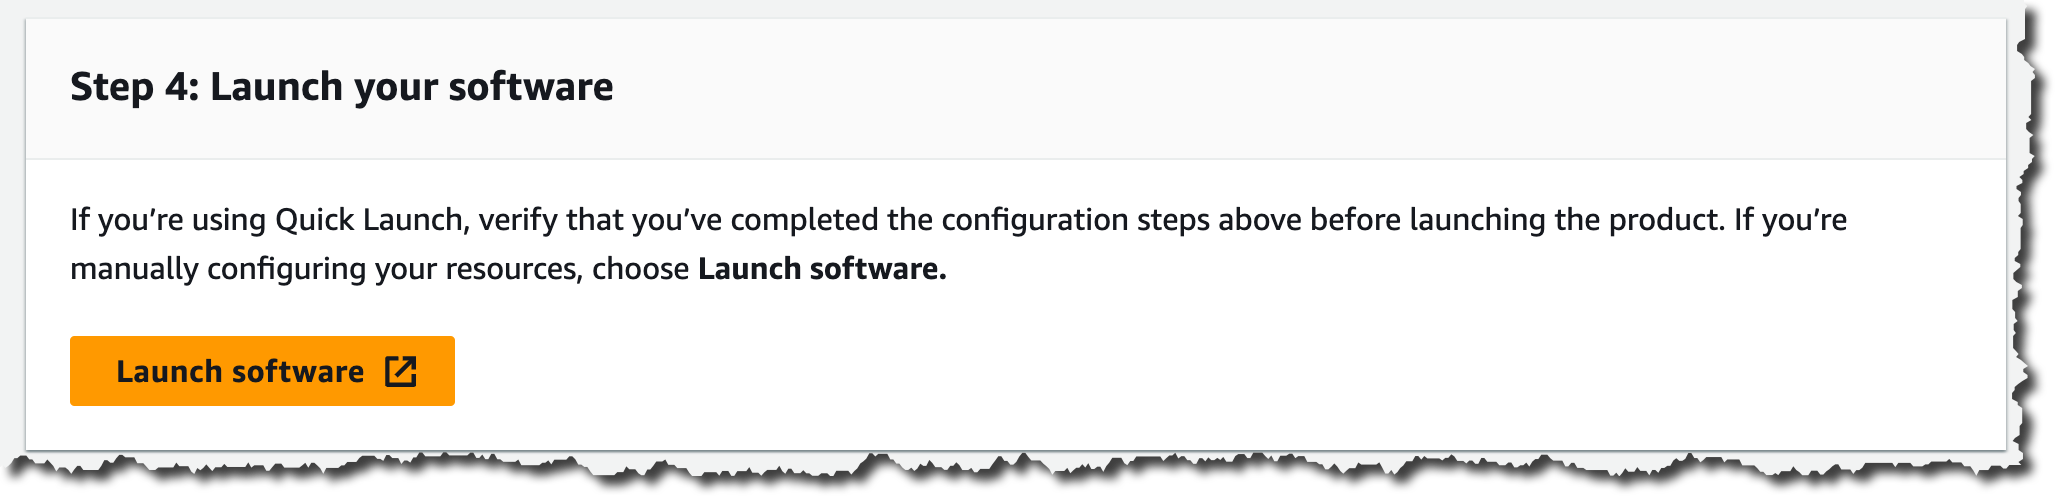 Step 6 - Launch your software